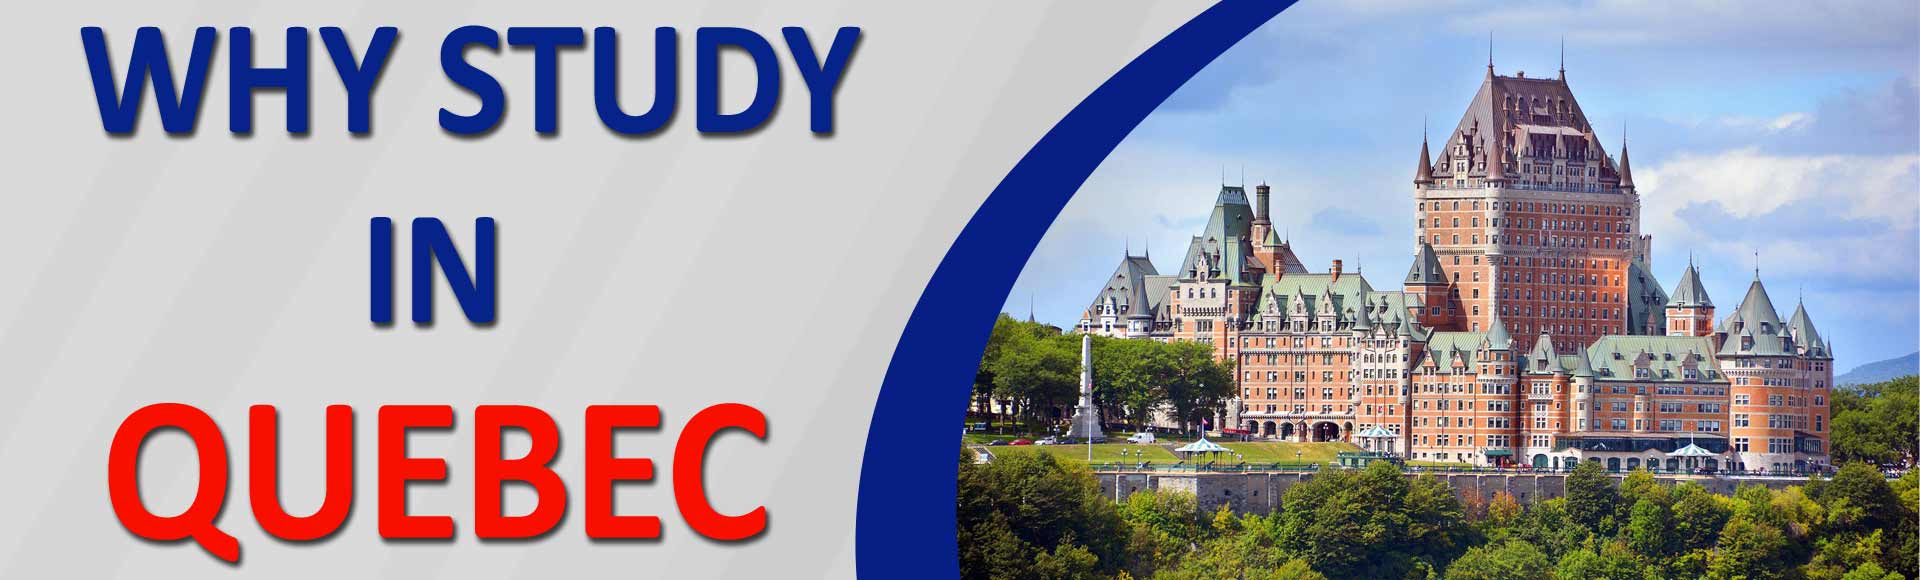 Top Reasons Why Study in Quebec